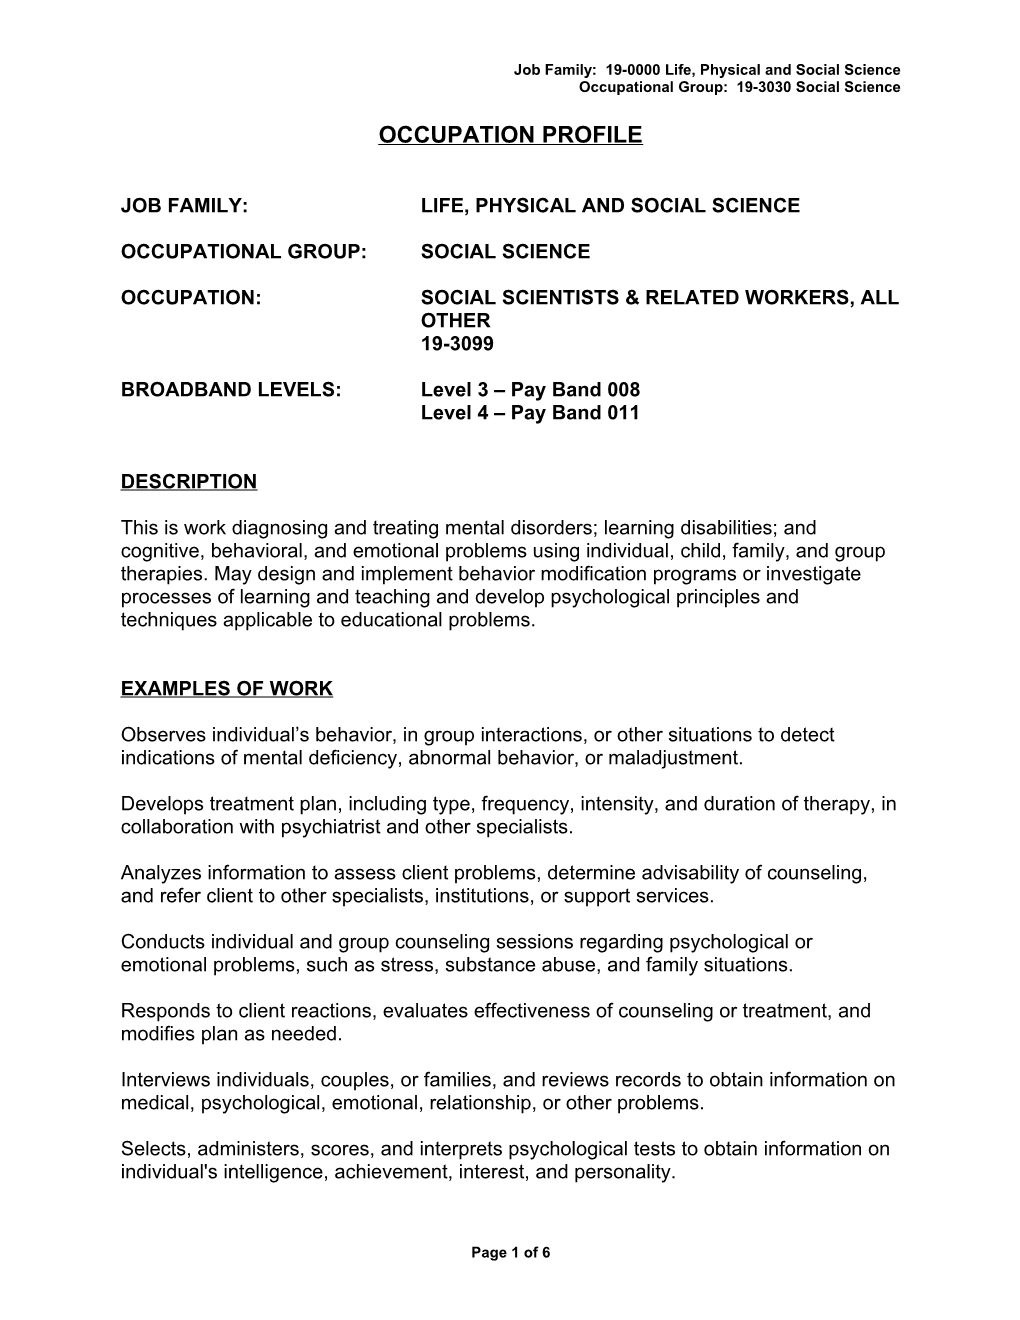 Job Family: 19-0000 Life, Physical and Social Science s1